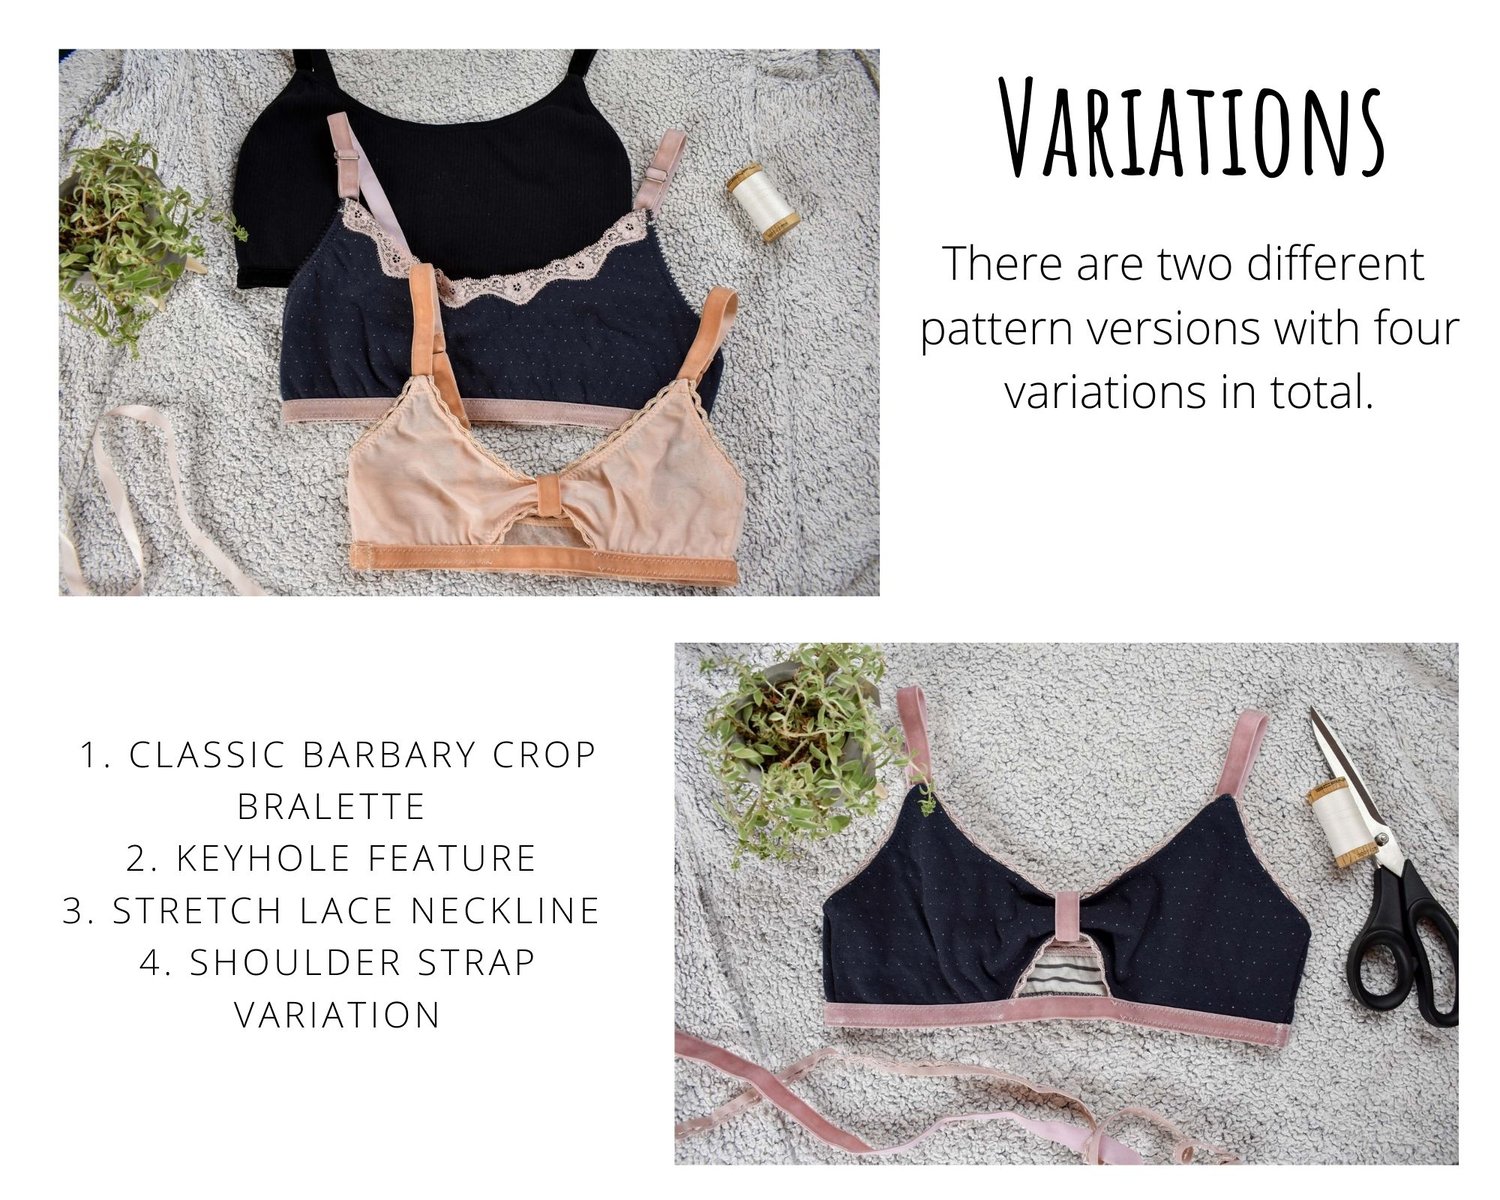 How to design your lace placement - The Barbary Bralette - Sew